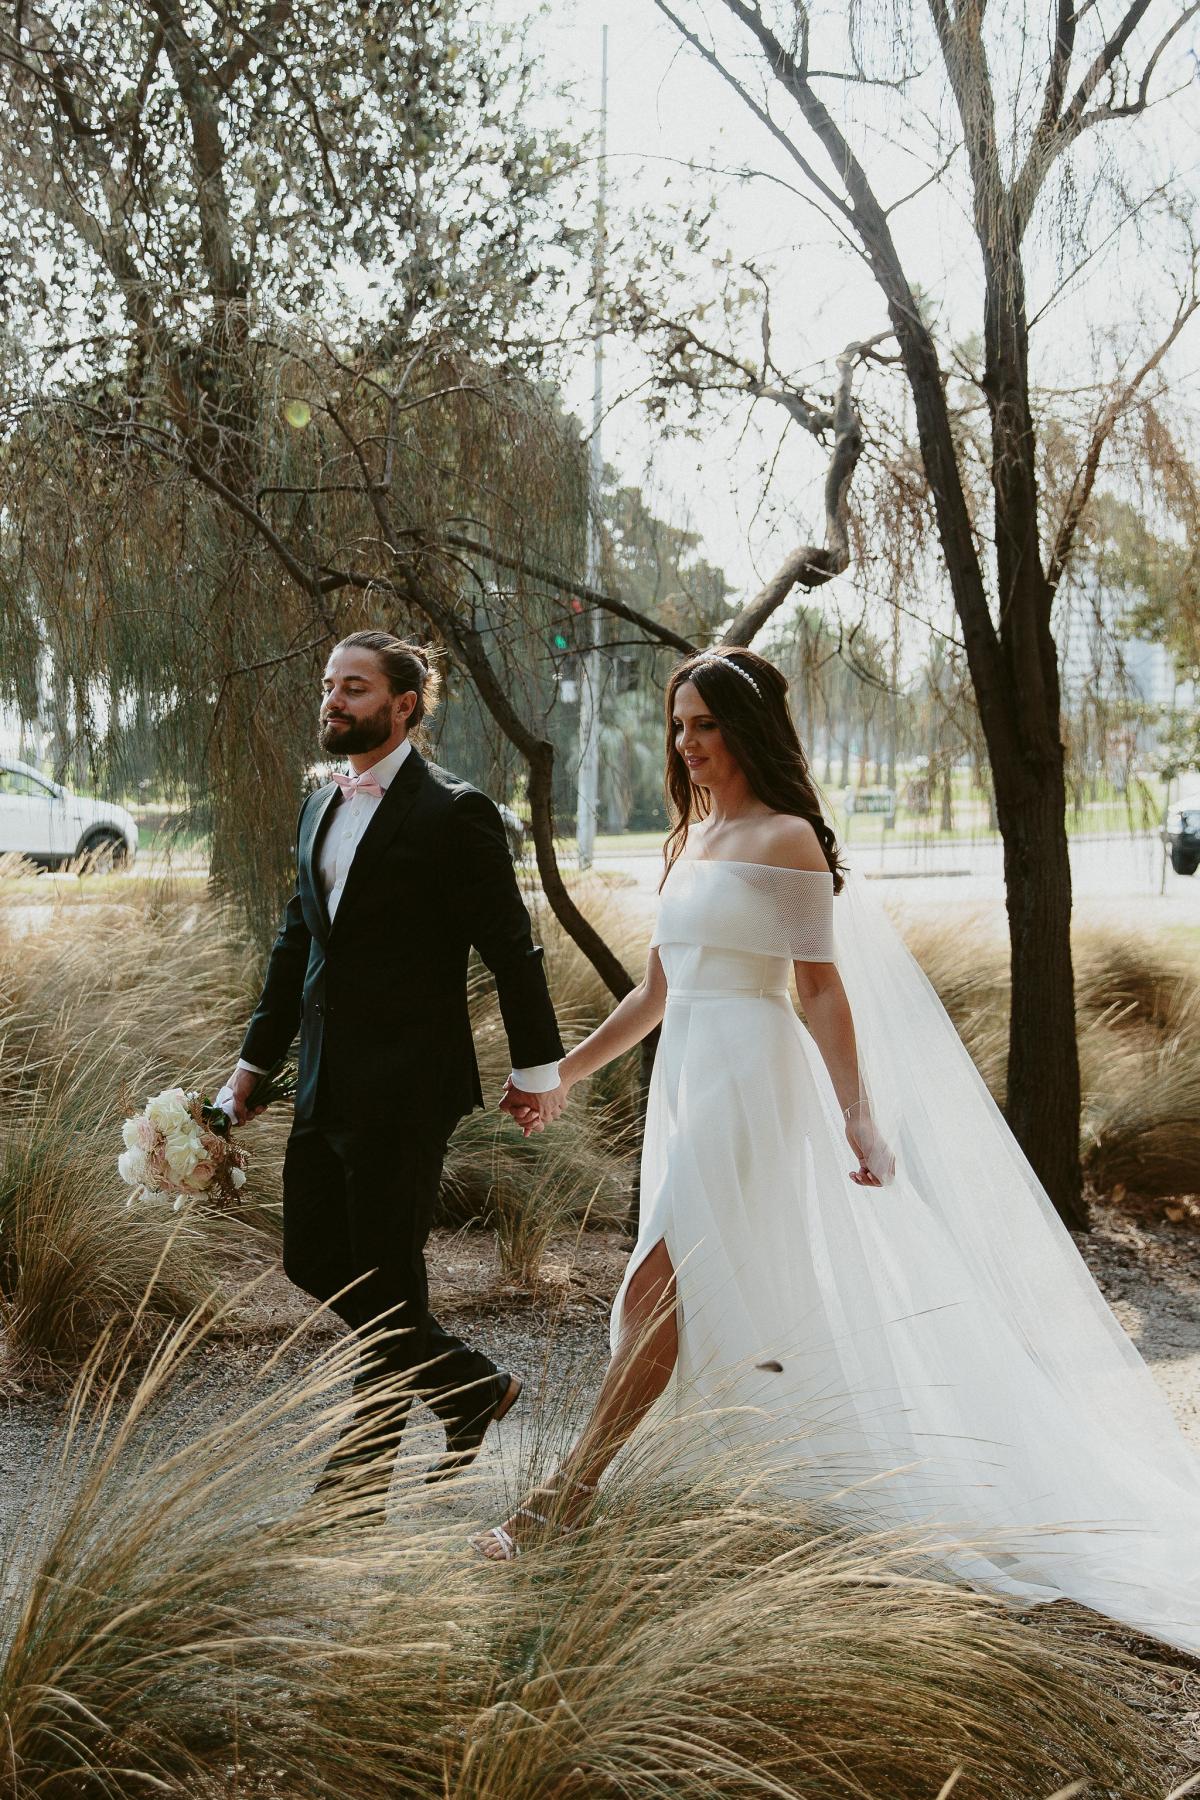 KWH real bride Libby walks with Luke through the woods. She wears the effortless Esther wedding dress with aline skirt and strapless bodice.